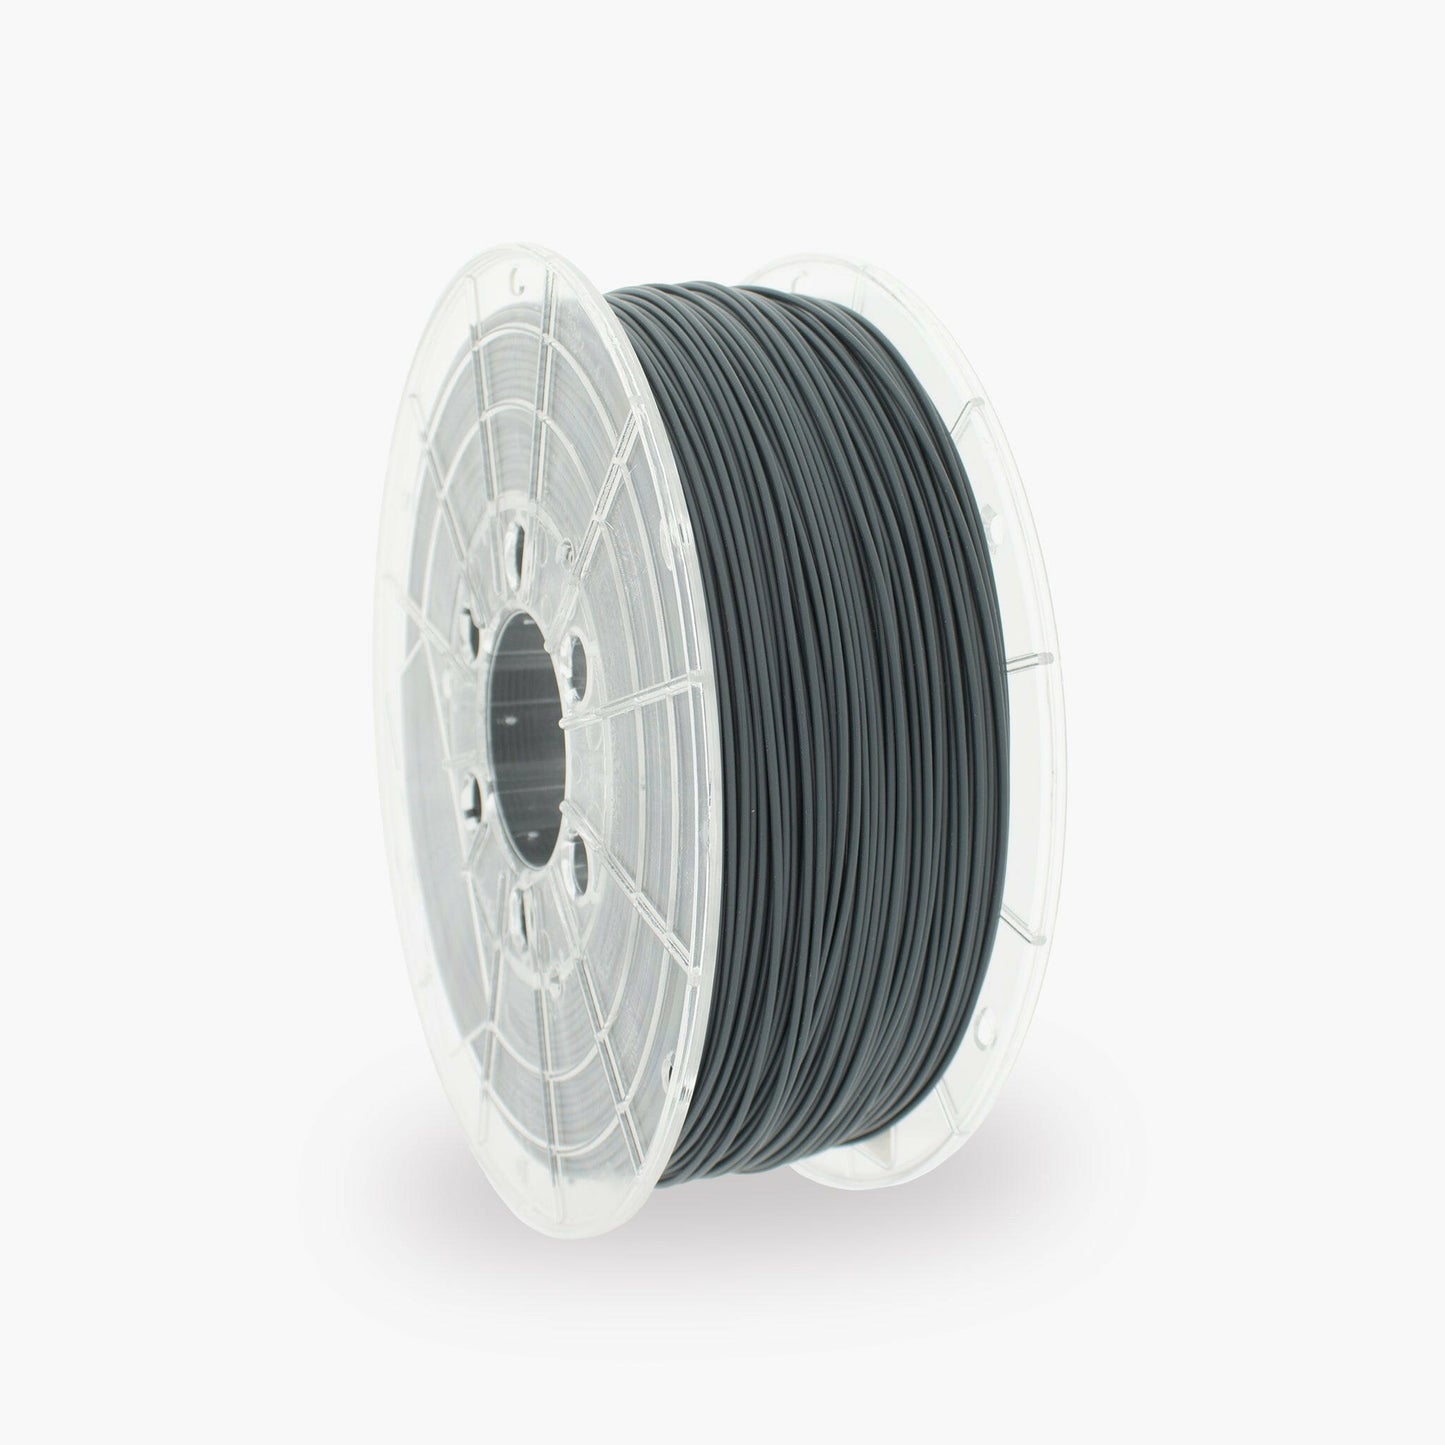 Iron Grey PLA 3D Printer Filament with a diameter of 1.75mm on a 1KG Spool.